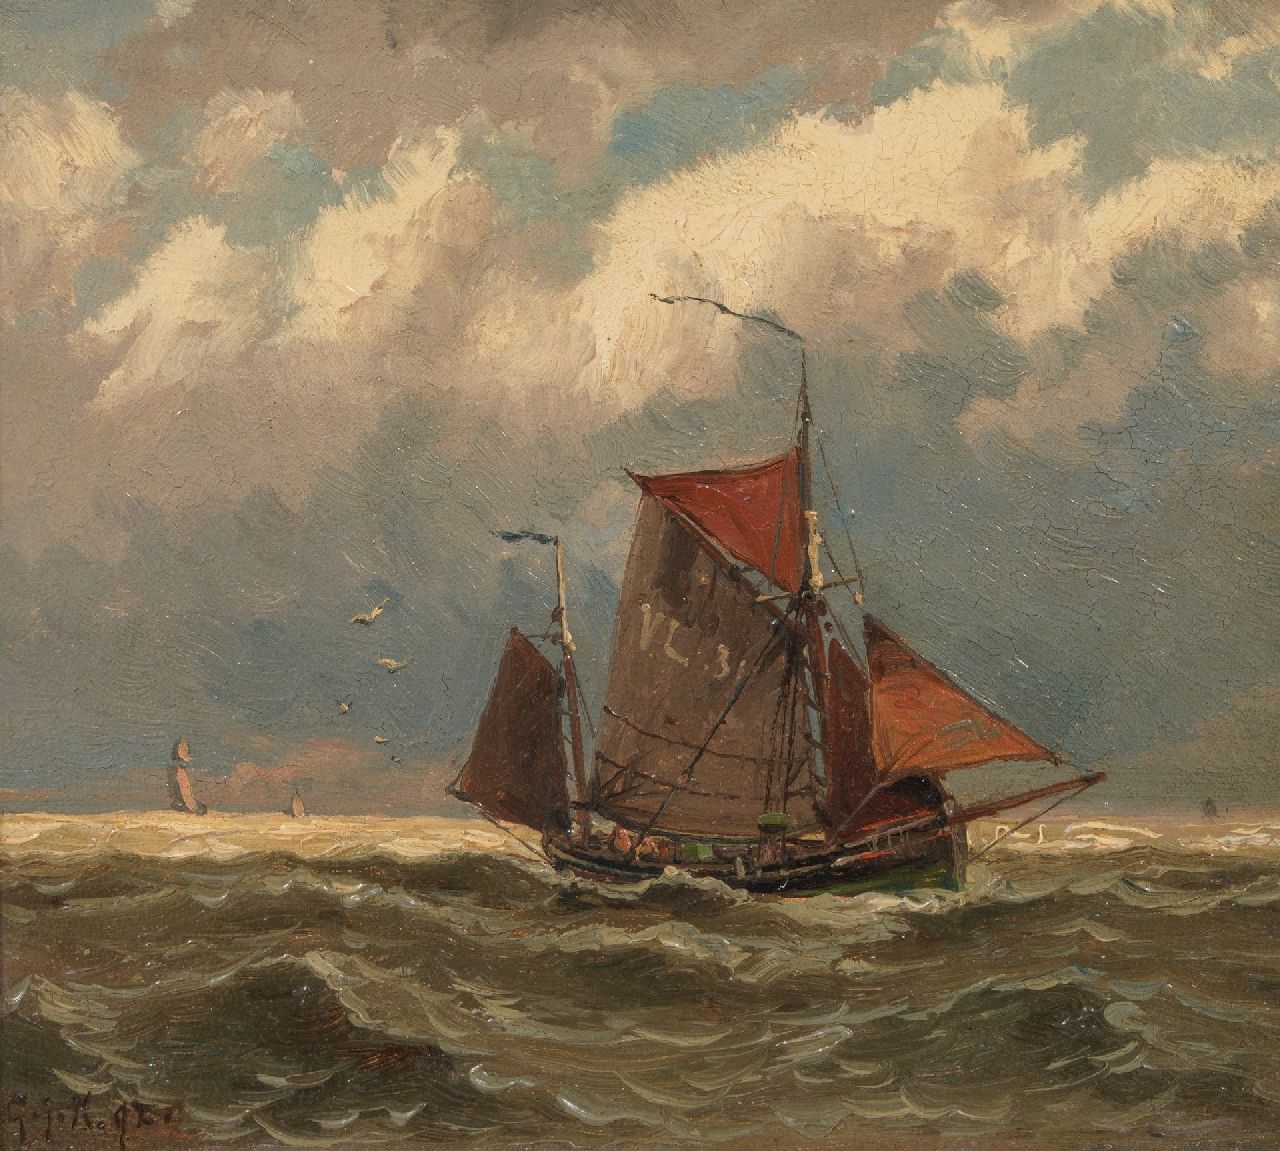 Koekkoek G.J.  | Gerardus Johannes 'Gerard' Koekkoek | Paintings offered for sale | Fishing boat on the high seas, oil on panel 14.6 x 16.9 cm, signed l.l. with initials and dated '92